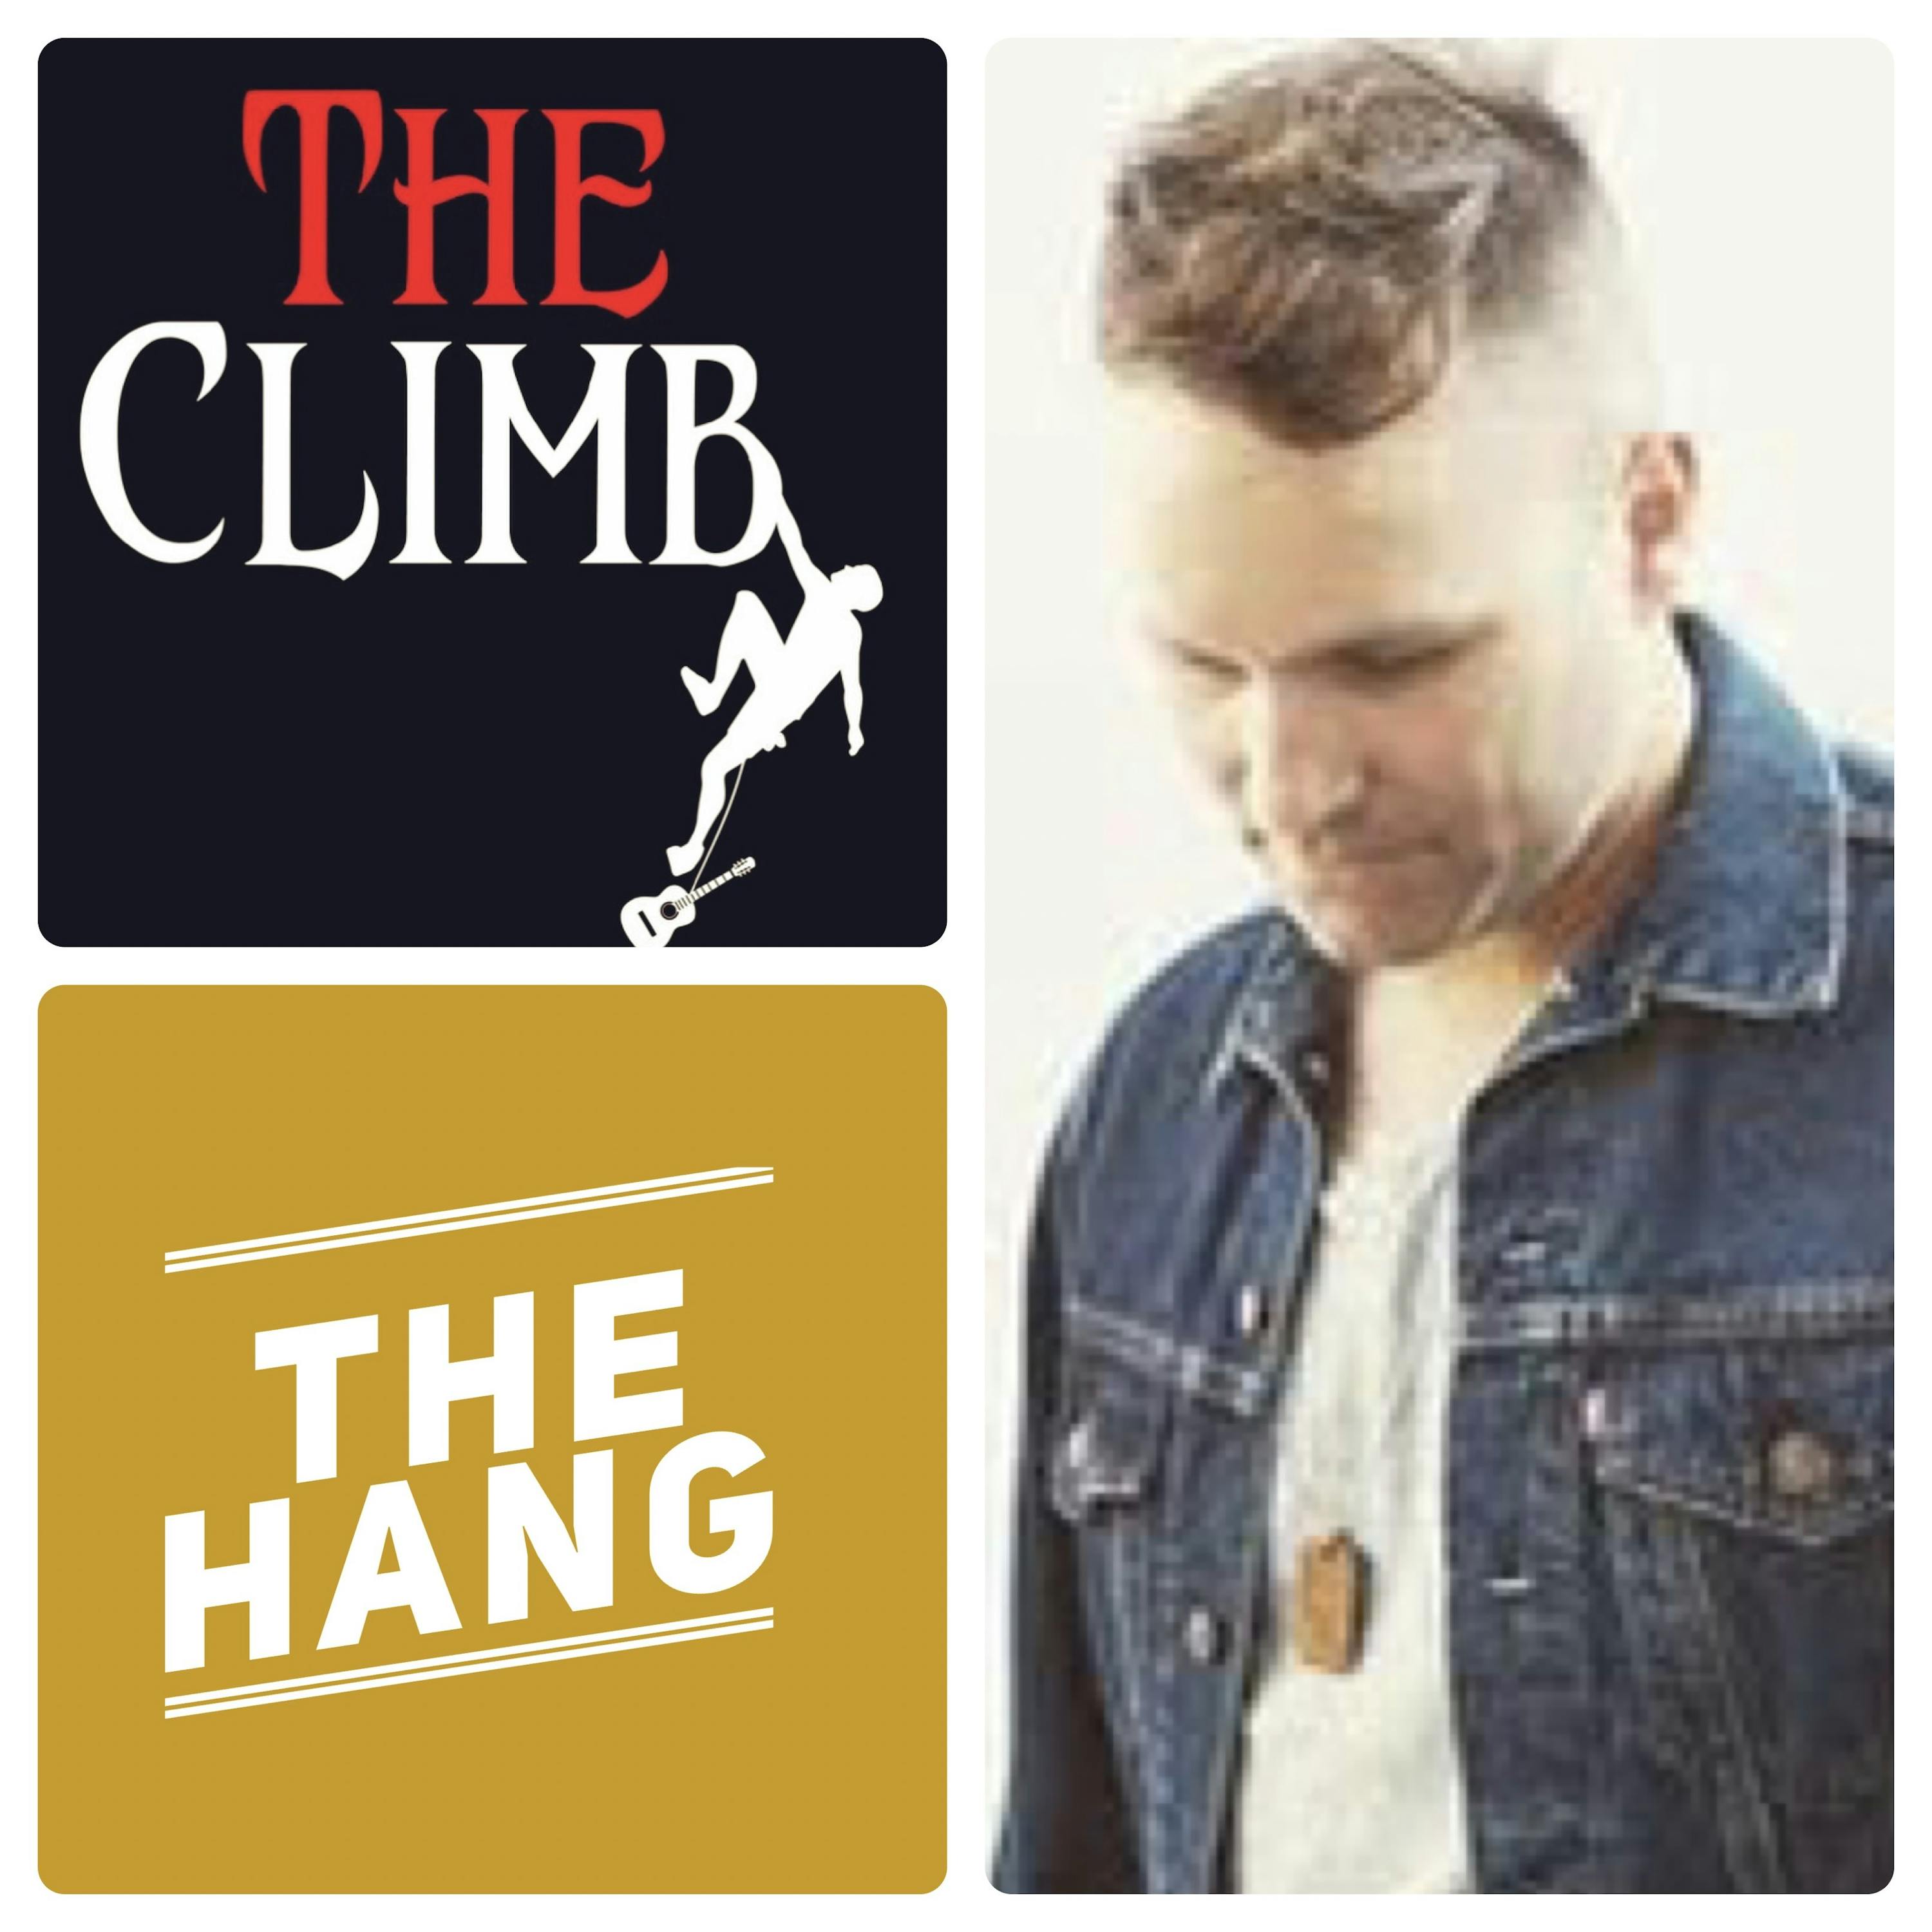 Songwriting Pro’s ”The Hang” with Hit Songwriter, Tyrus Morgan